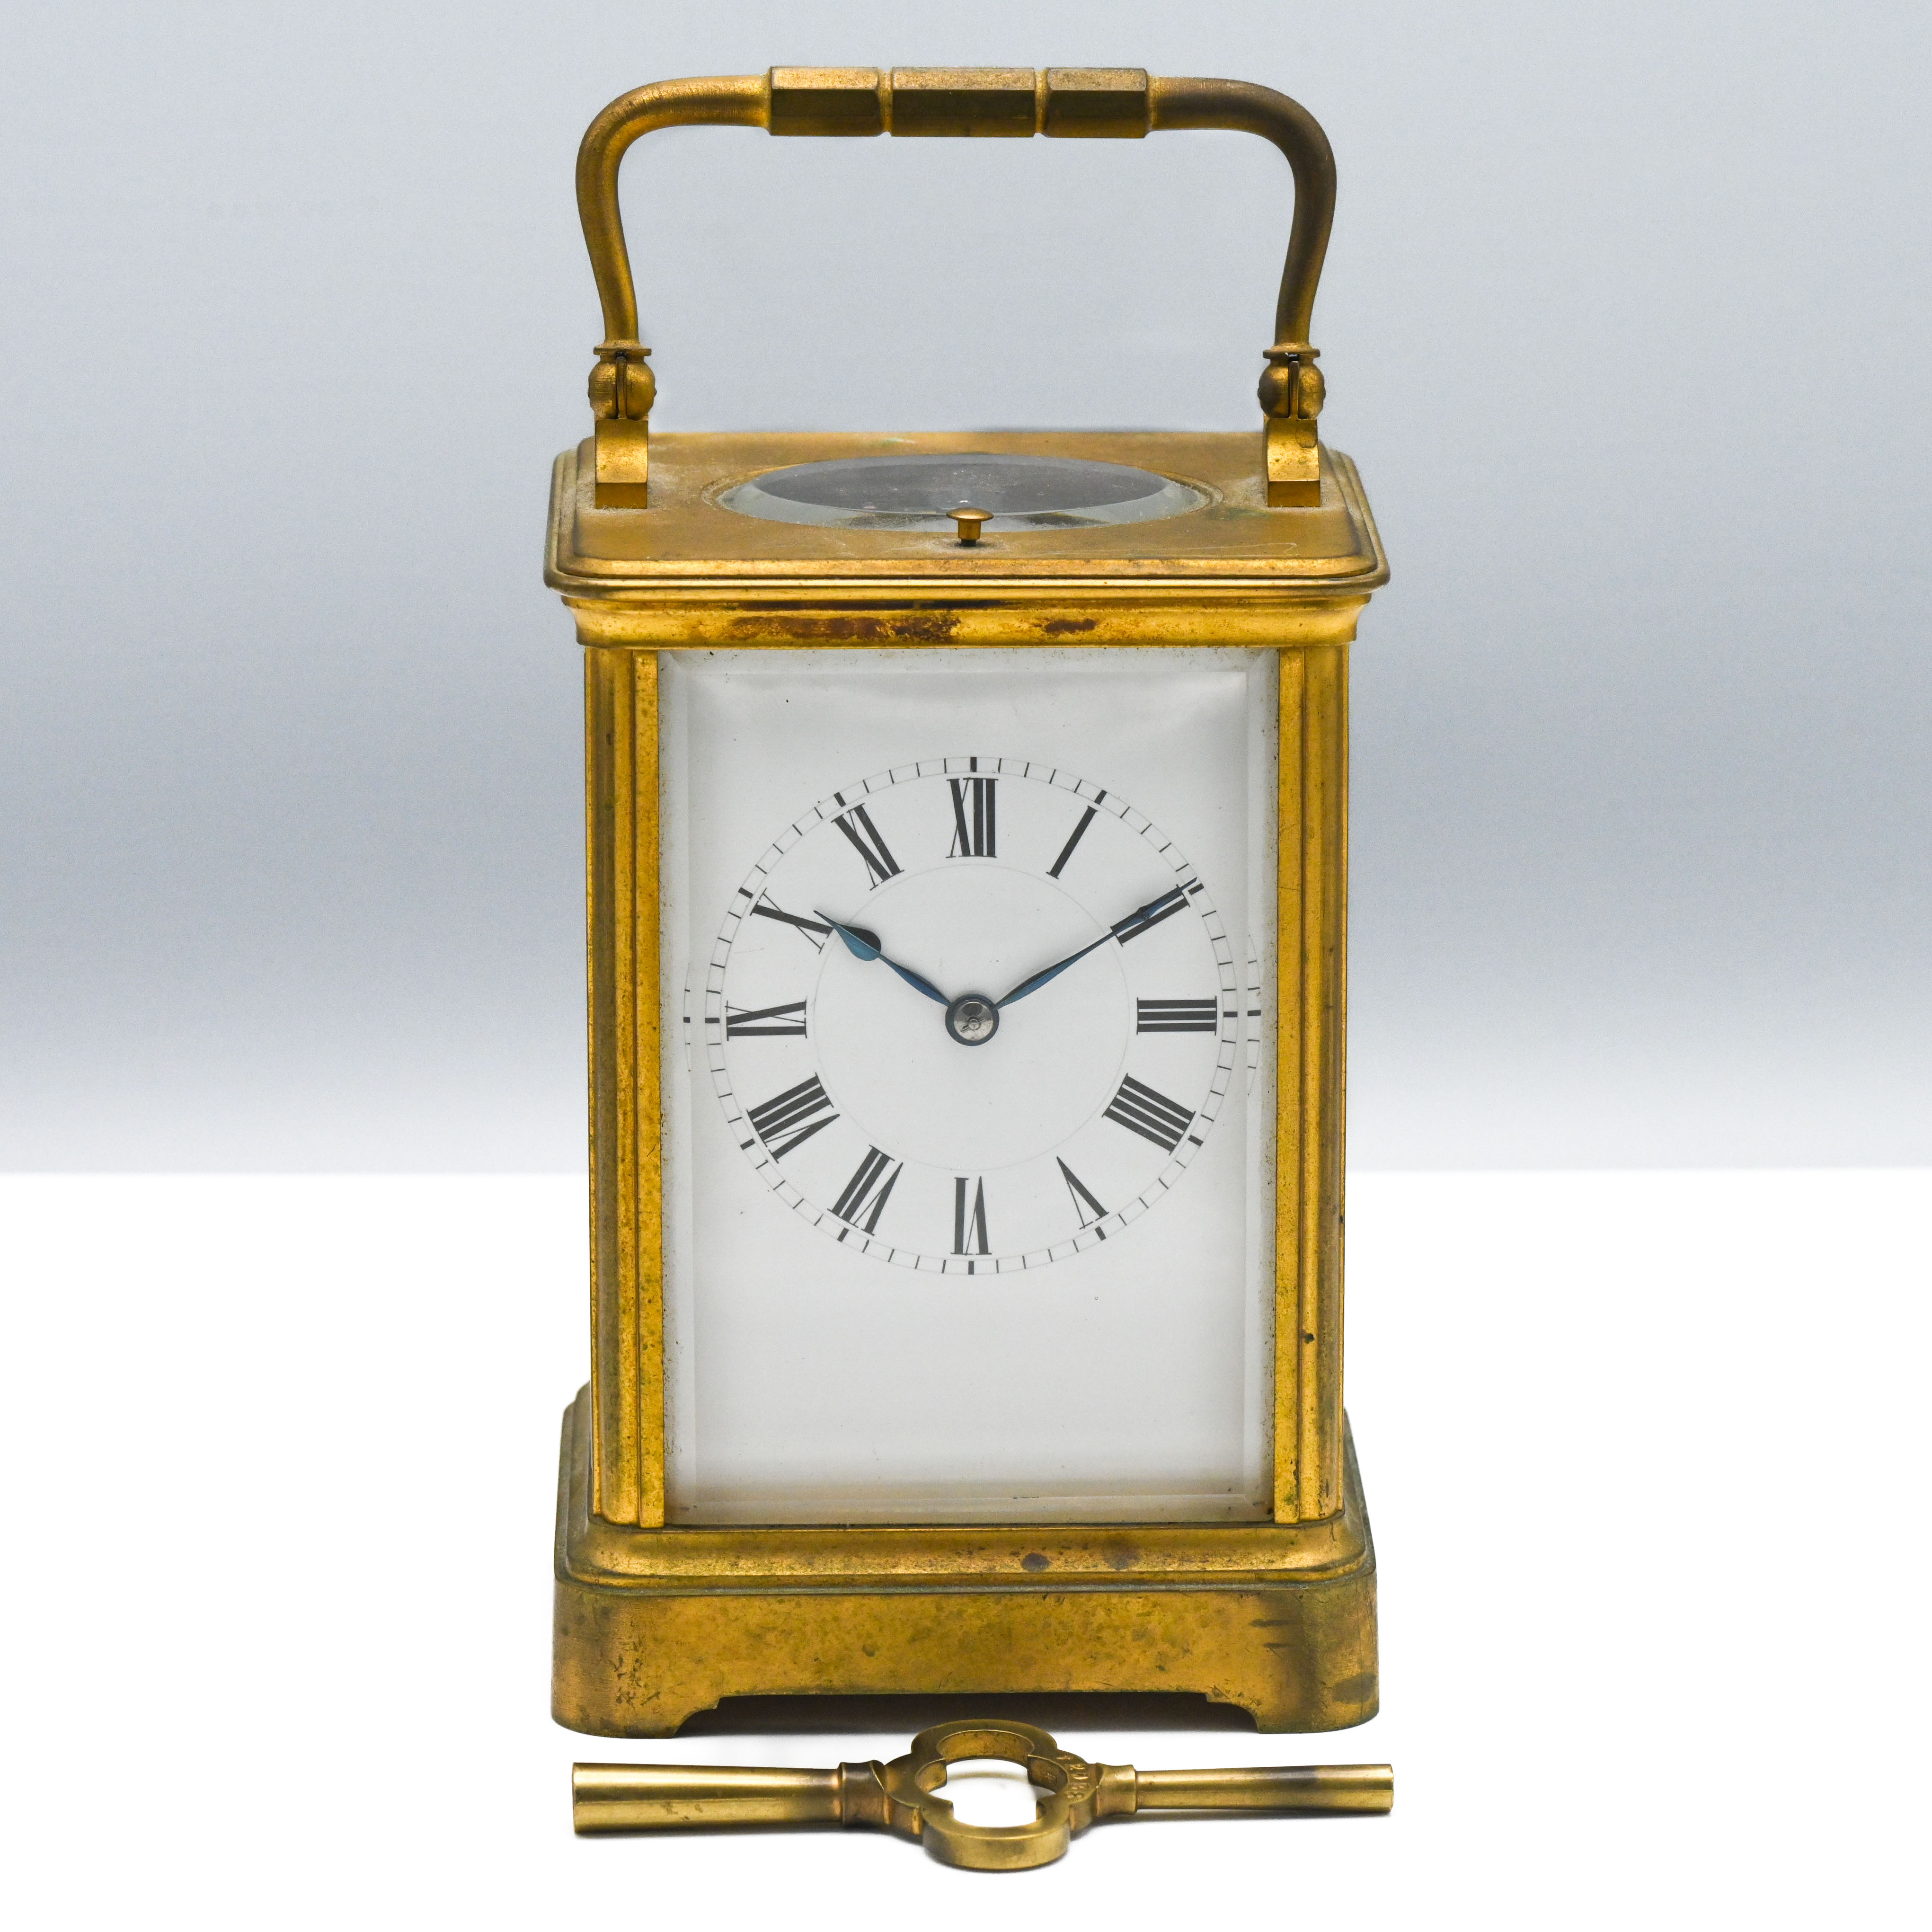 A repeater carriage clock with platform escapement movement, marked Paris, number 12038, with key,